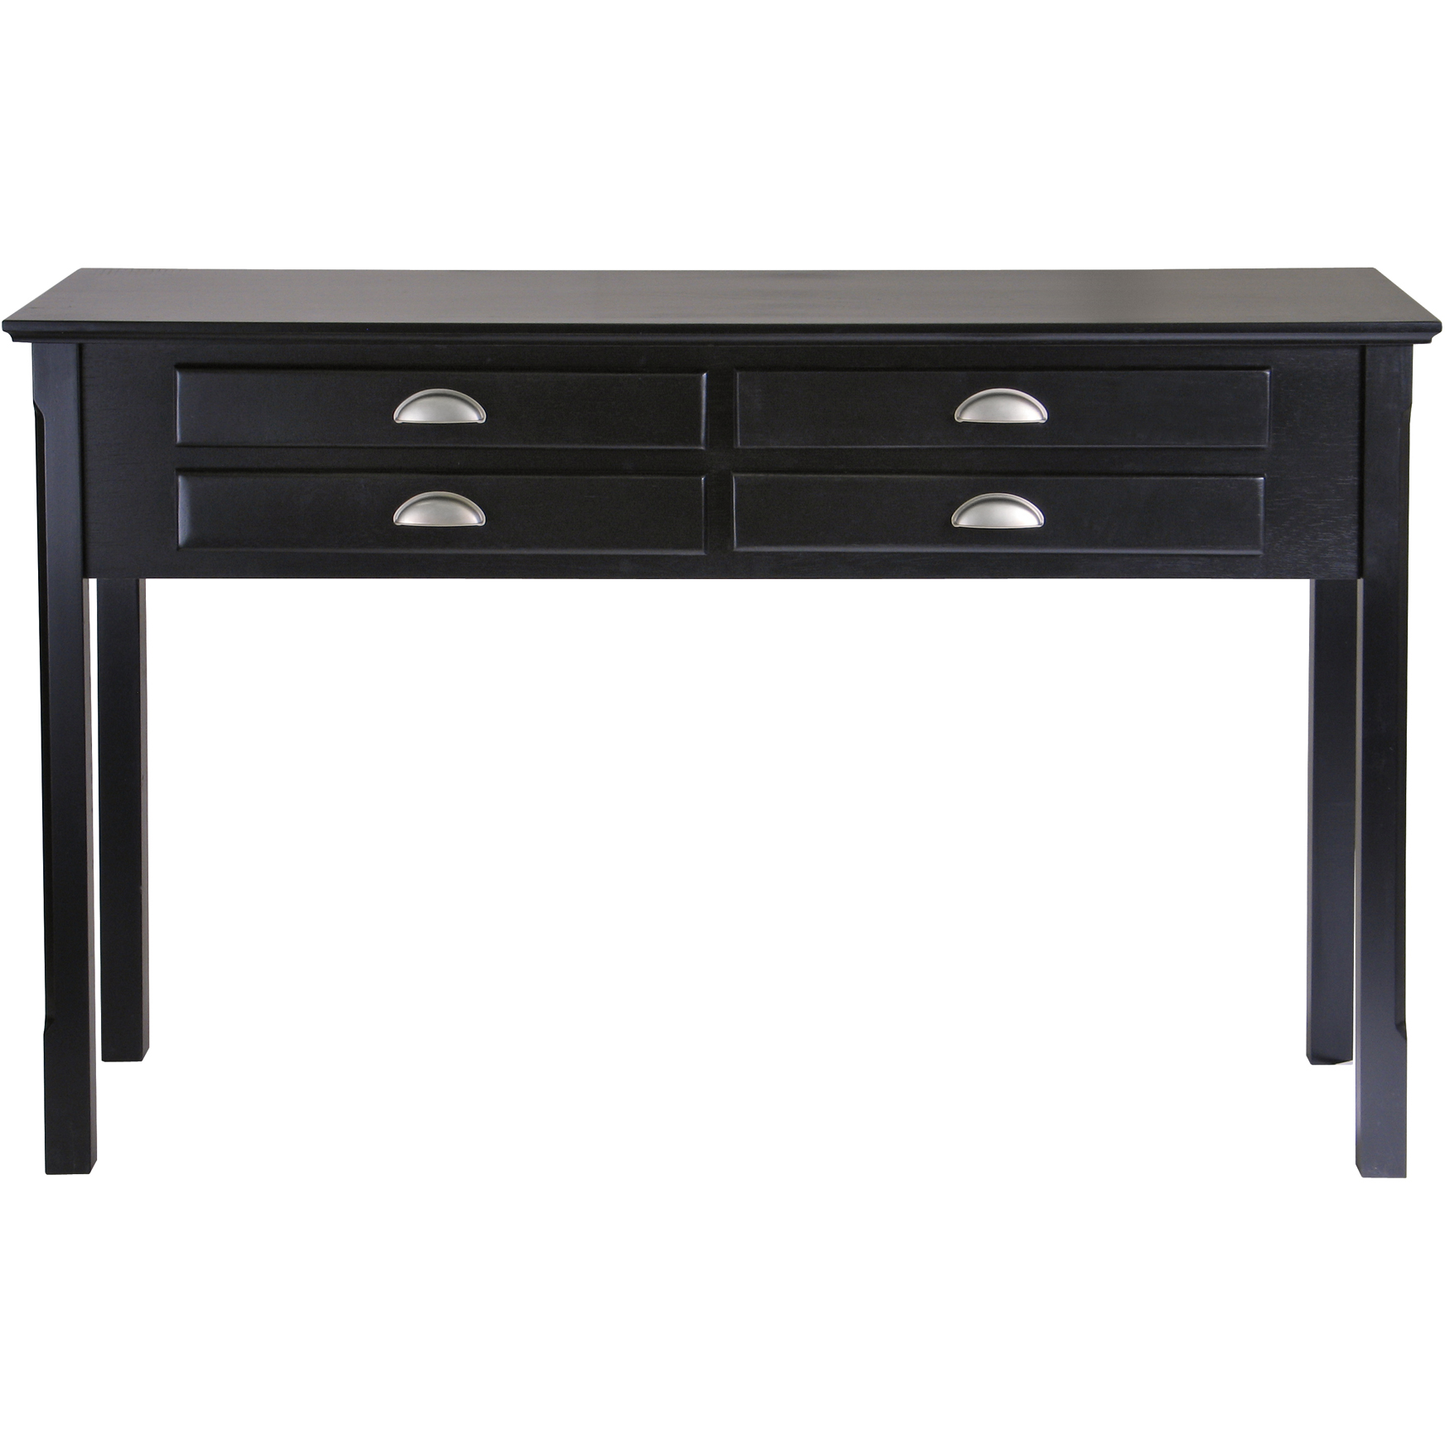 Winsome Timber Sideboard Console Table with Drawers - Black -  - 2